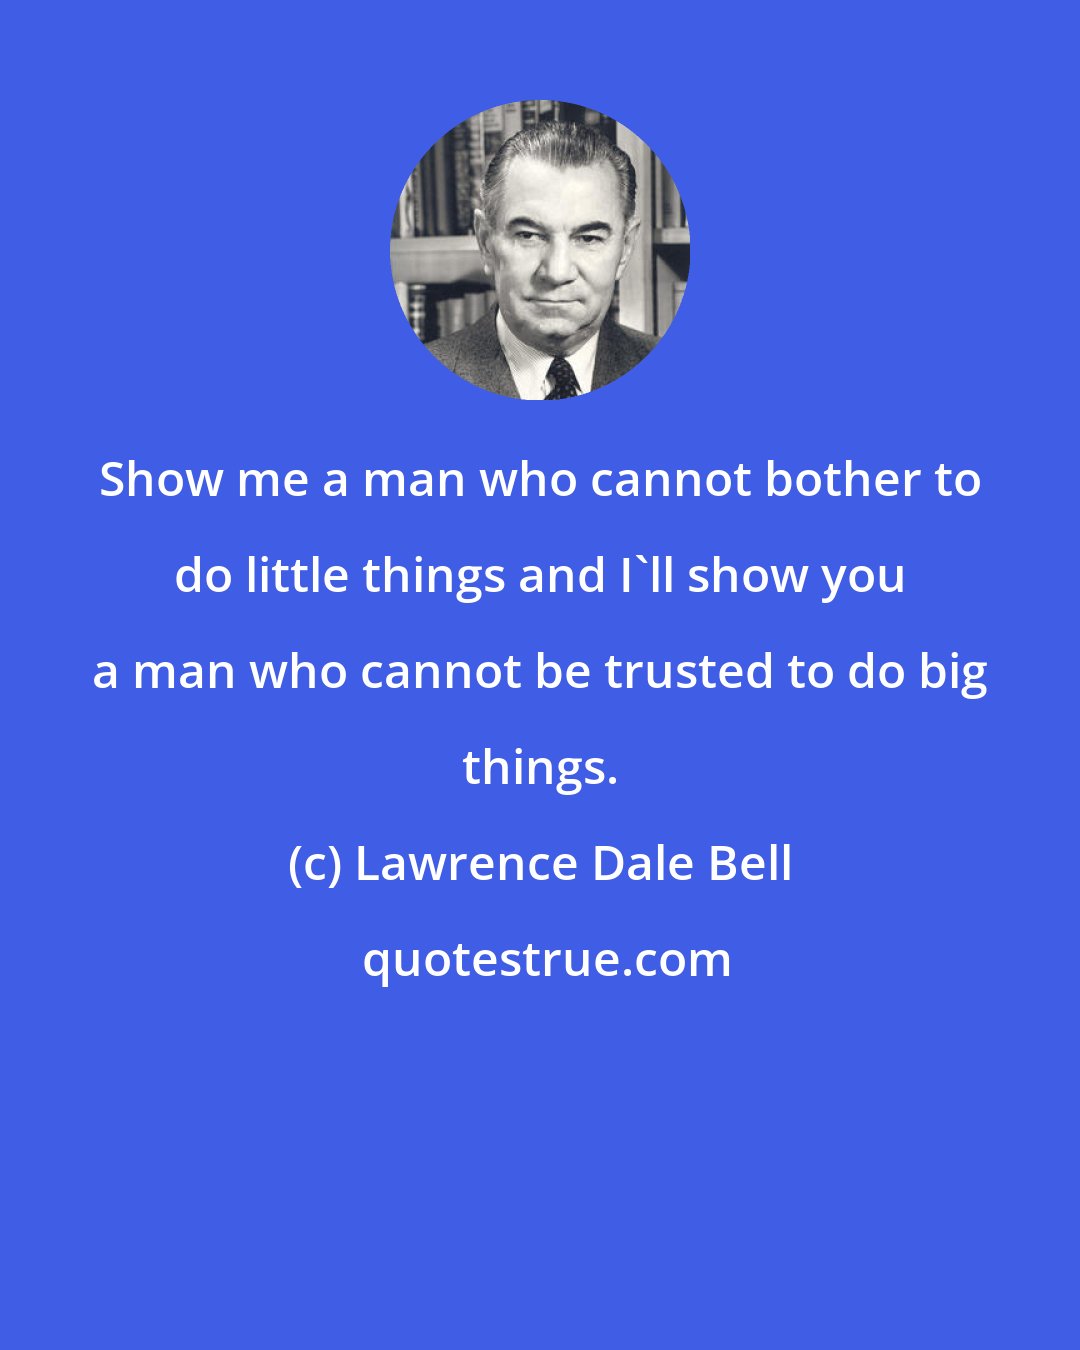 Lawrence Dale Bell: Show me a man who cannot bother to do little things and I'll show you a man who cannot be trusted to do big things.